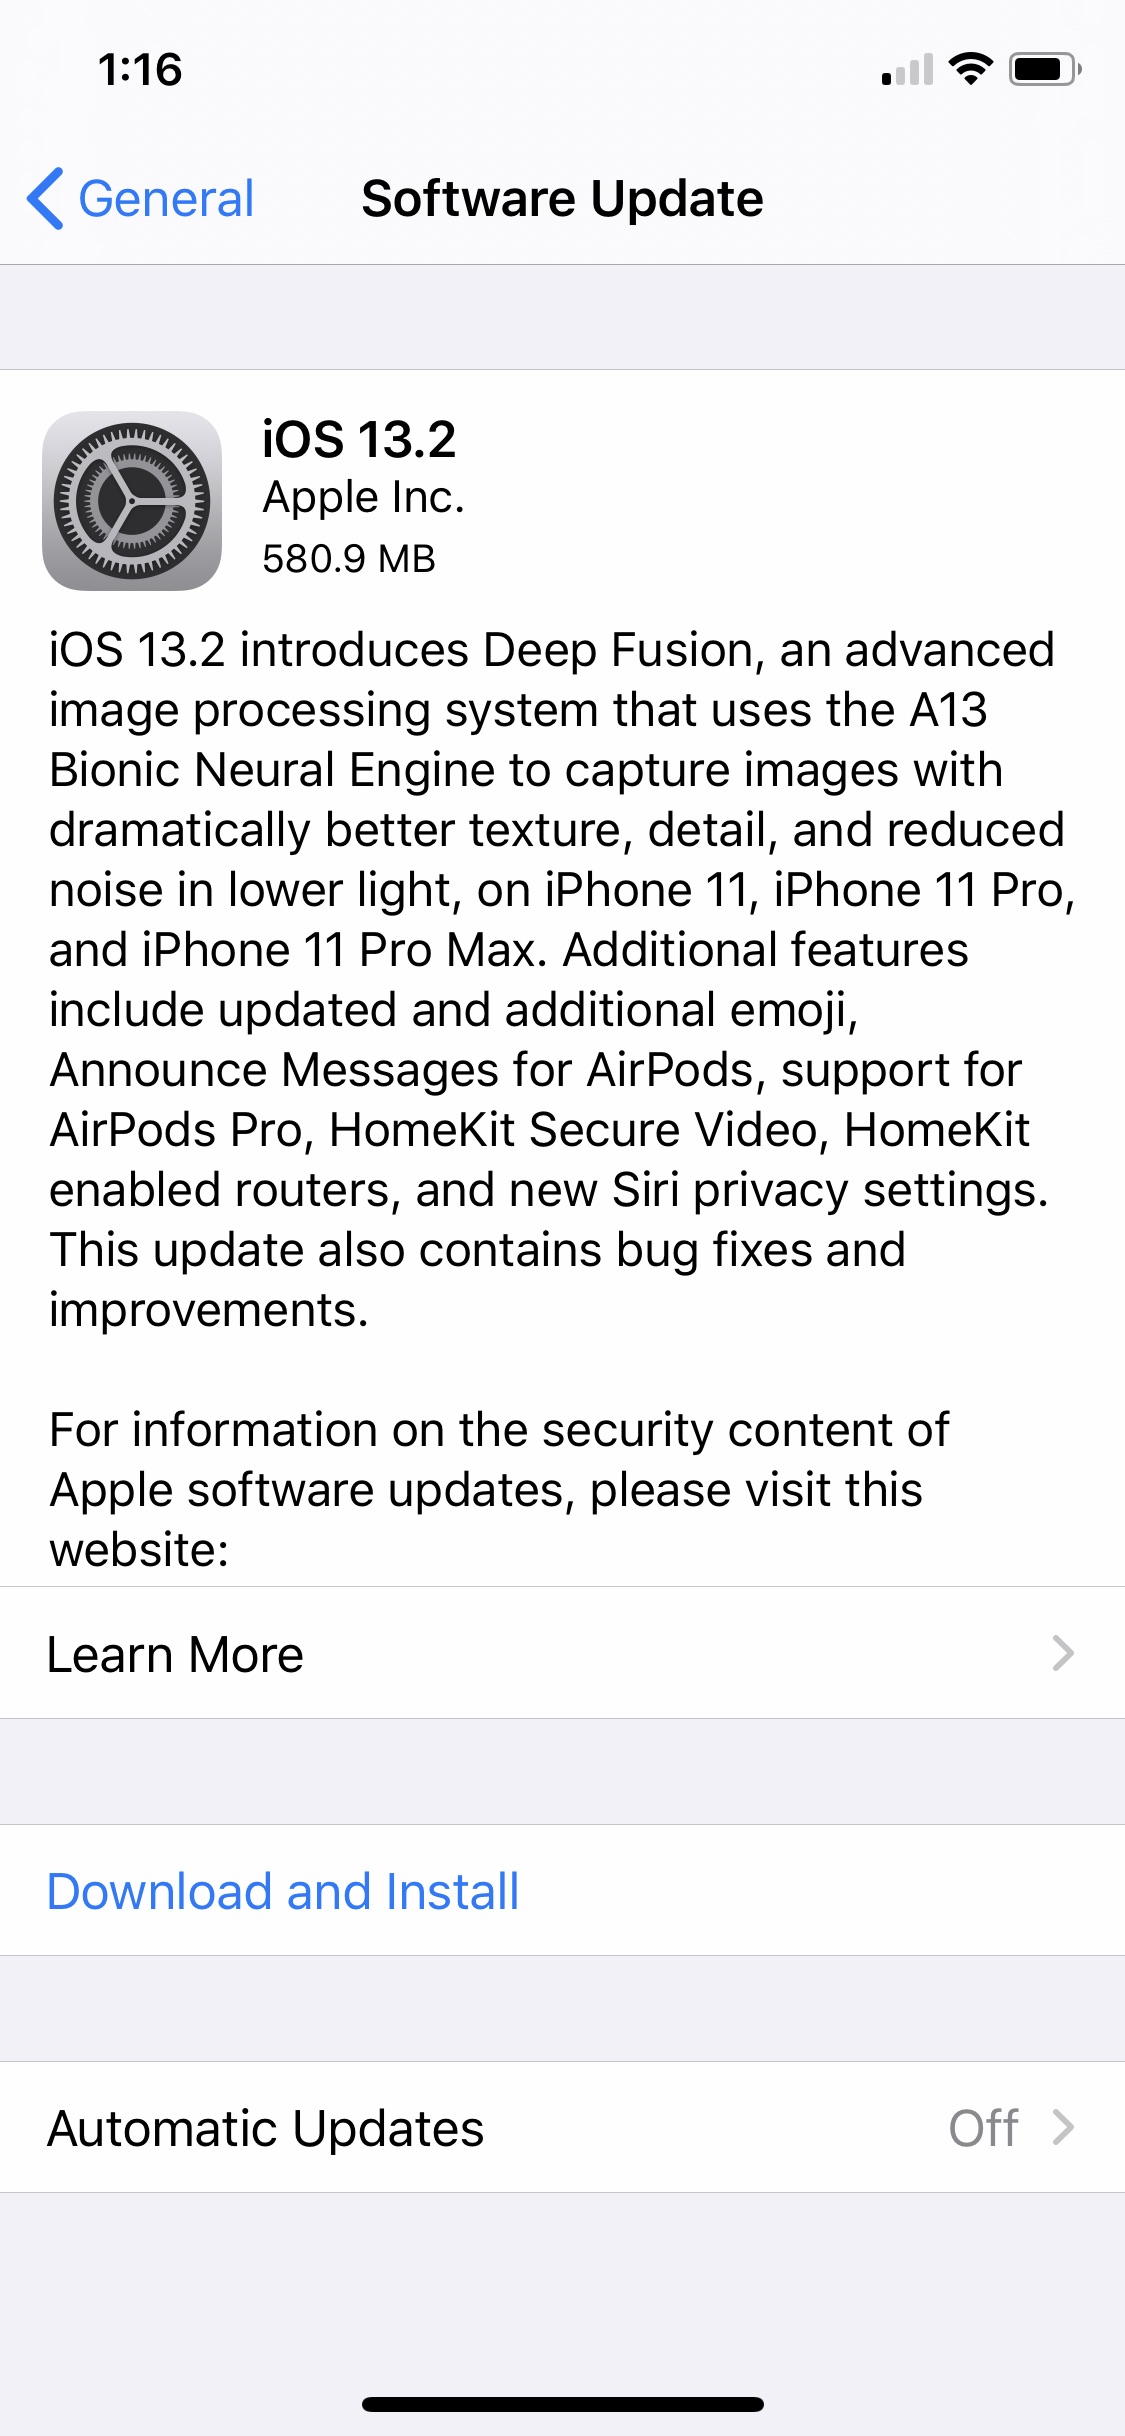 Apple Releases iOS 13.2 With Deep Fusion, HomeKit Secure Video, More [Download]